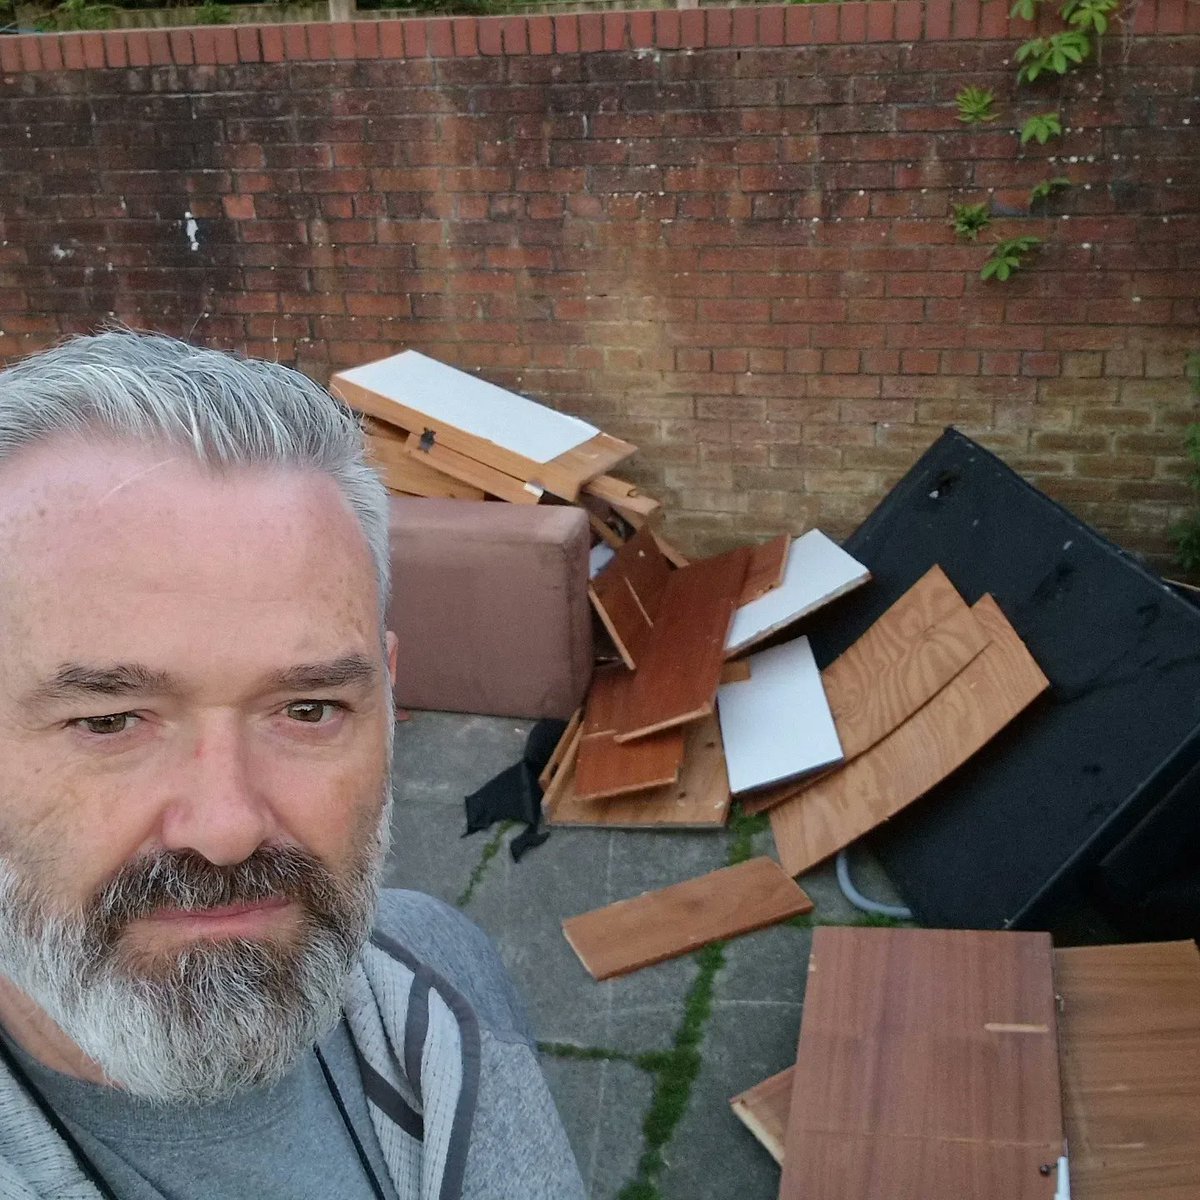 A bad weekend across Waterloo and Crosby for litter &  flytipping. I've reported several incidents of flytipping, saw for myself the poor state of South Road and beach area on Sunday

I'll be asking for more resources to be deployed for weekends till the end of the summer